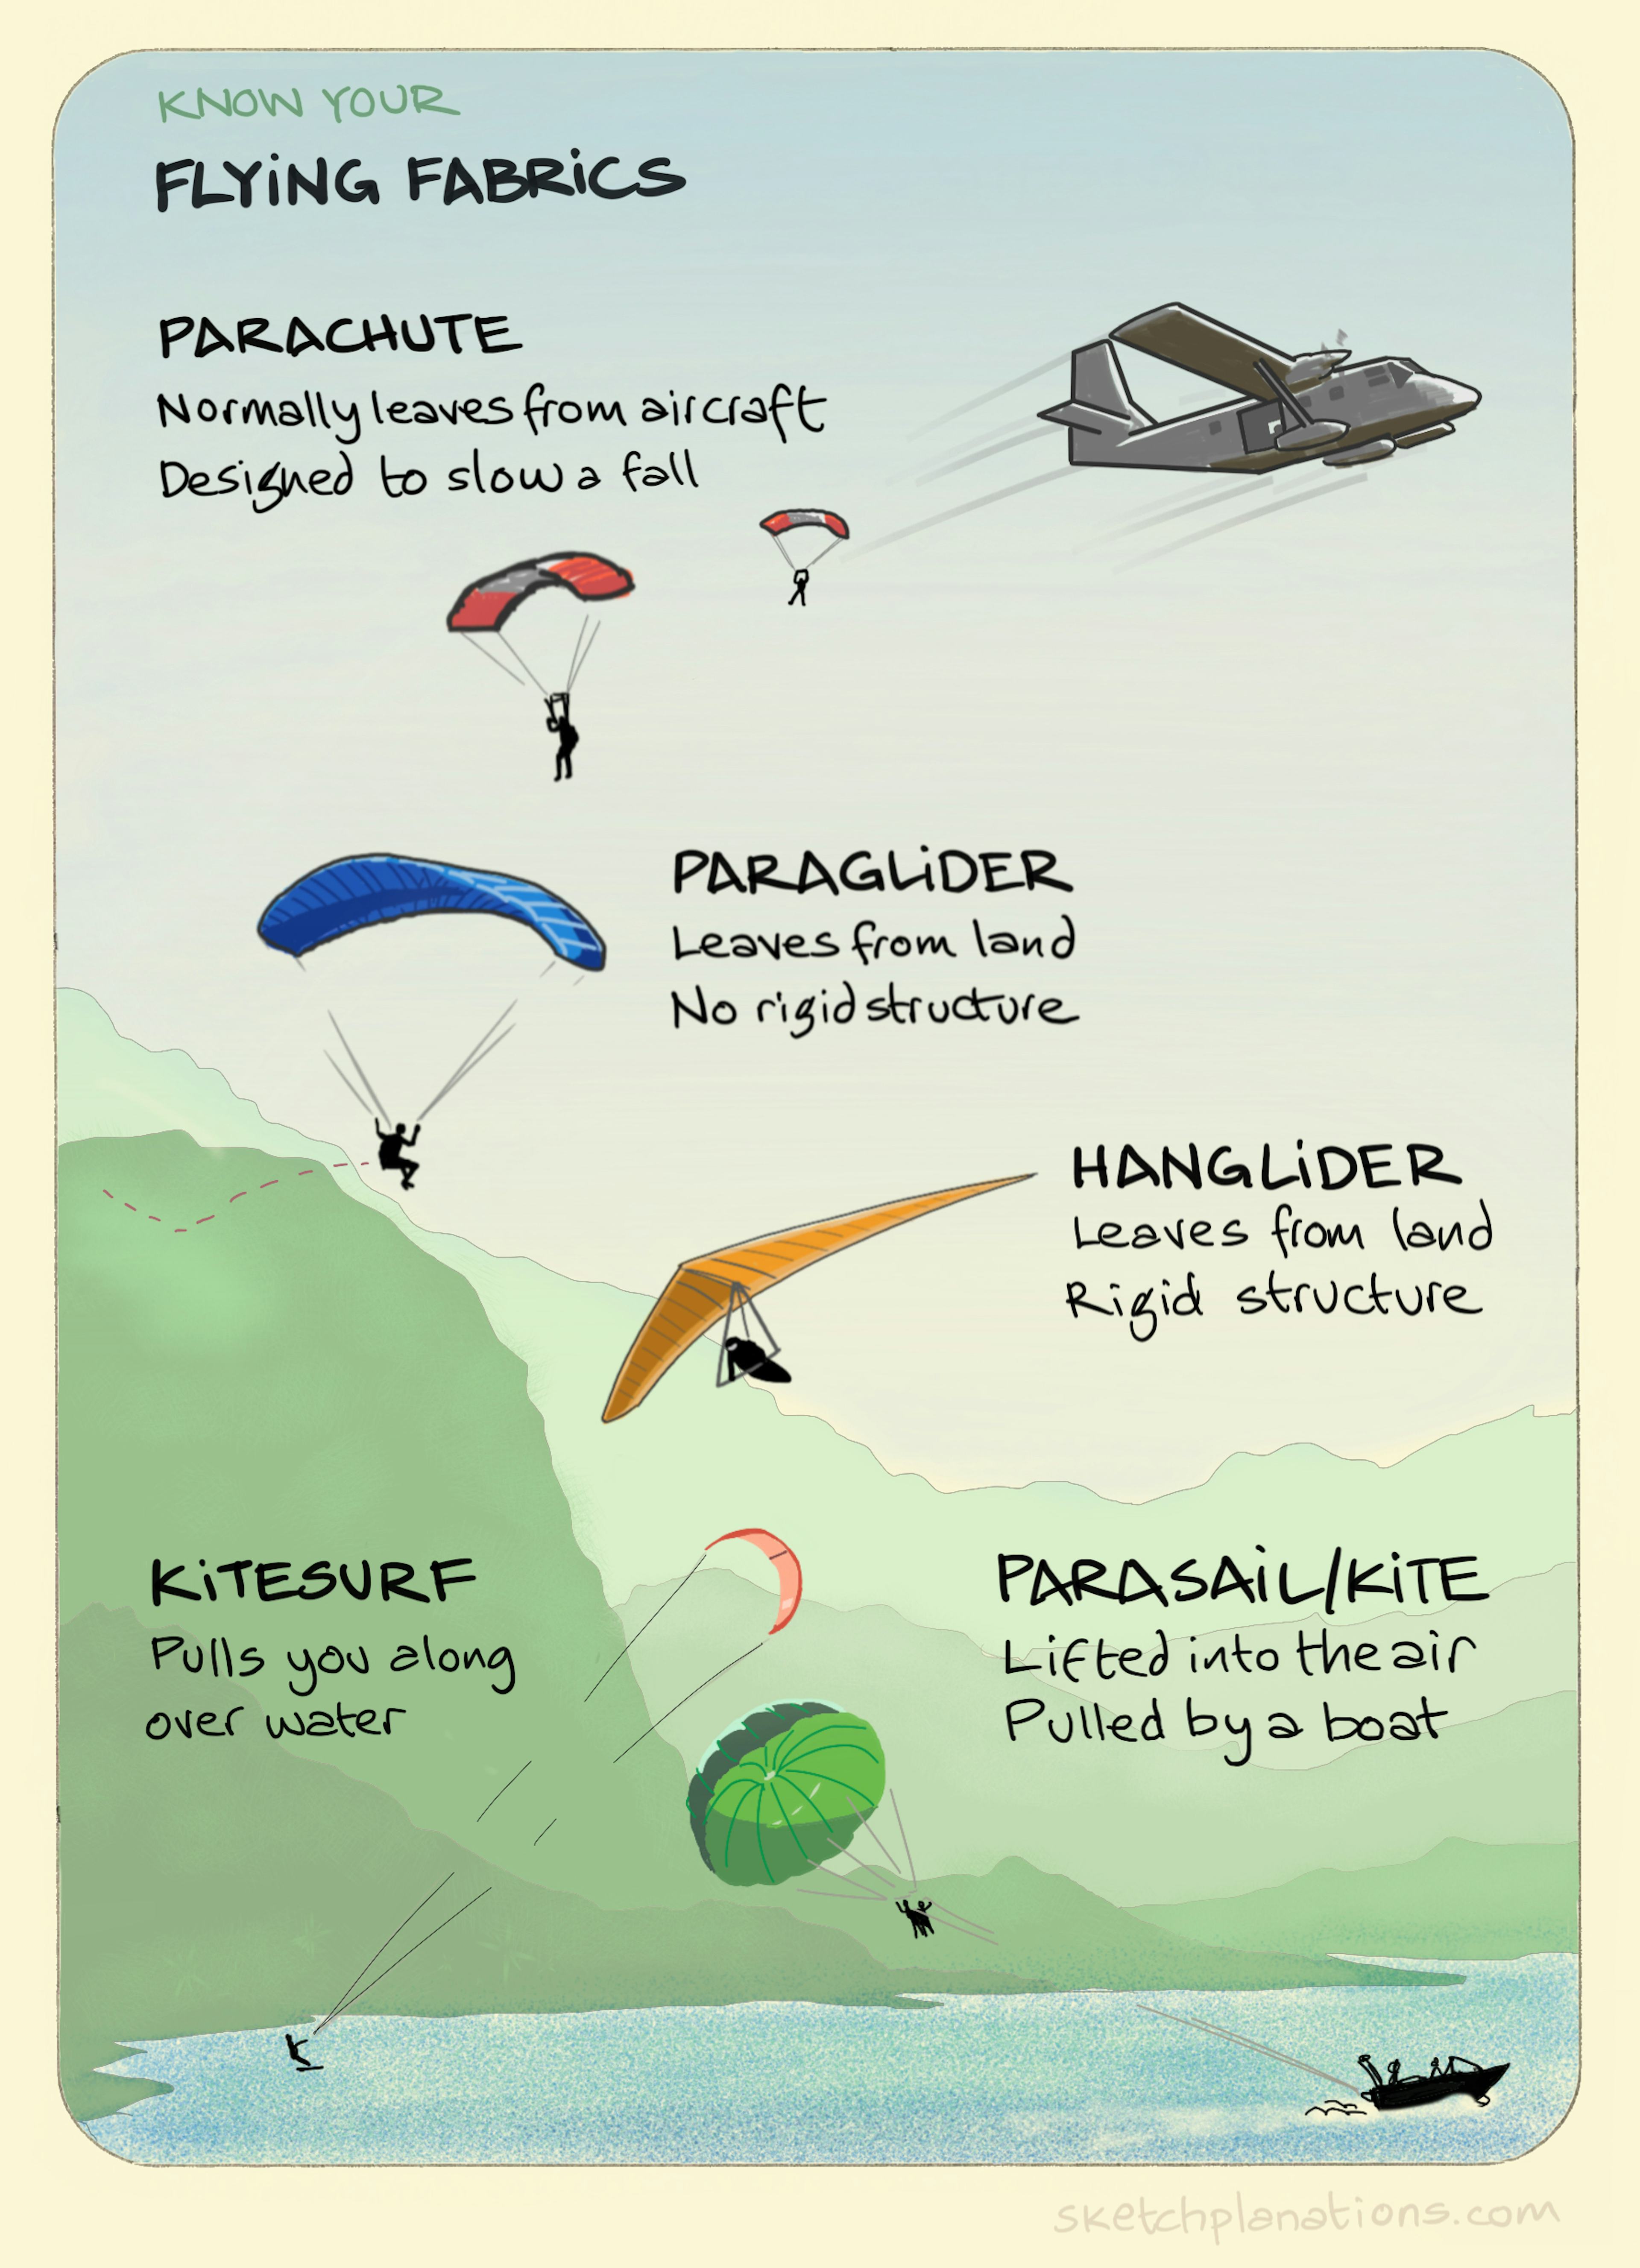 Know your flying fabrics illustration: in a green, mountainous landscape with a lake we see a variety of people flying using different methods; 2 people have jumped from a plane with parachutes; a paraglider sails beneath them; a hanglider soars with the occupants legs stretched out behind; on the water a kitesurfer is pulled along by the wind; and 2 people enjoy a parasail ride being pulled behind a speedboat.